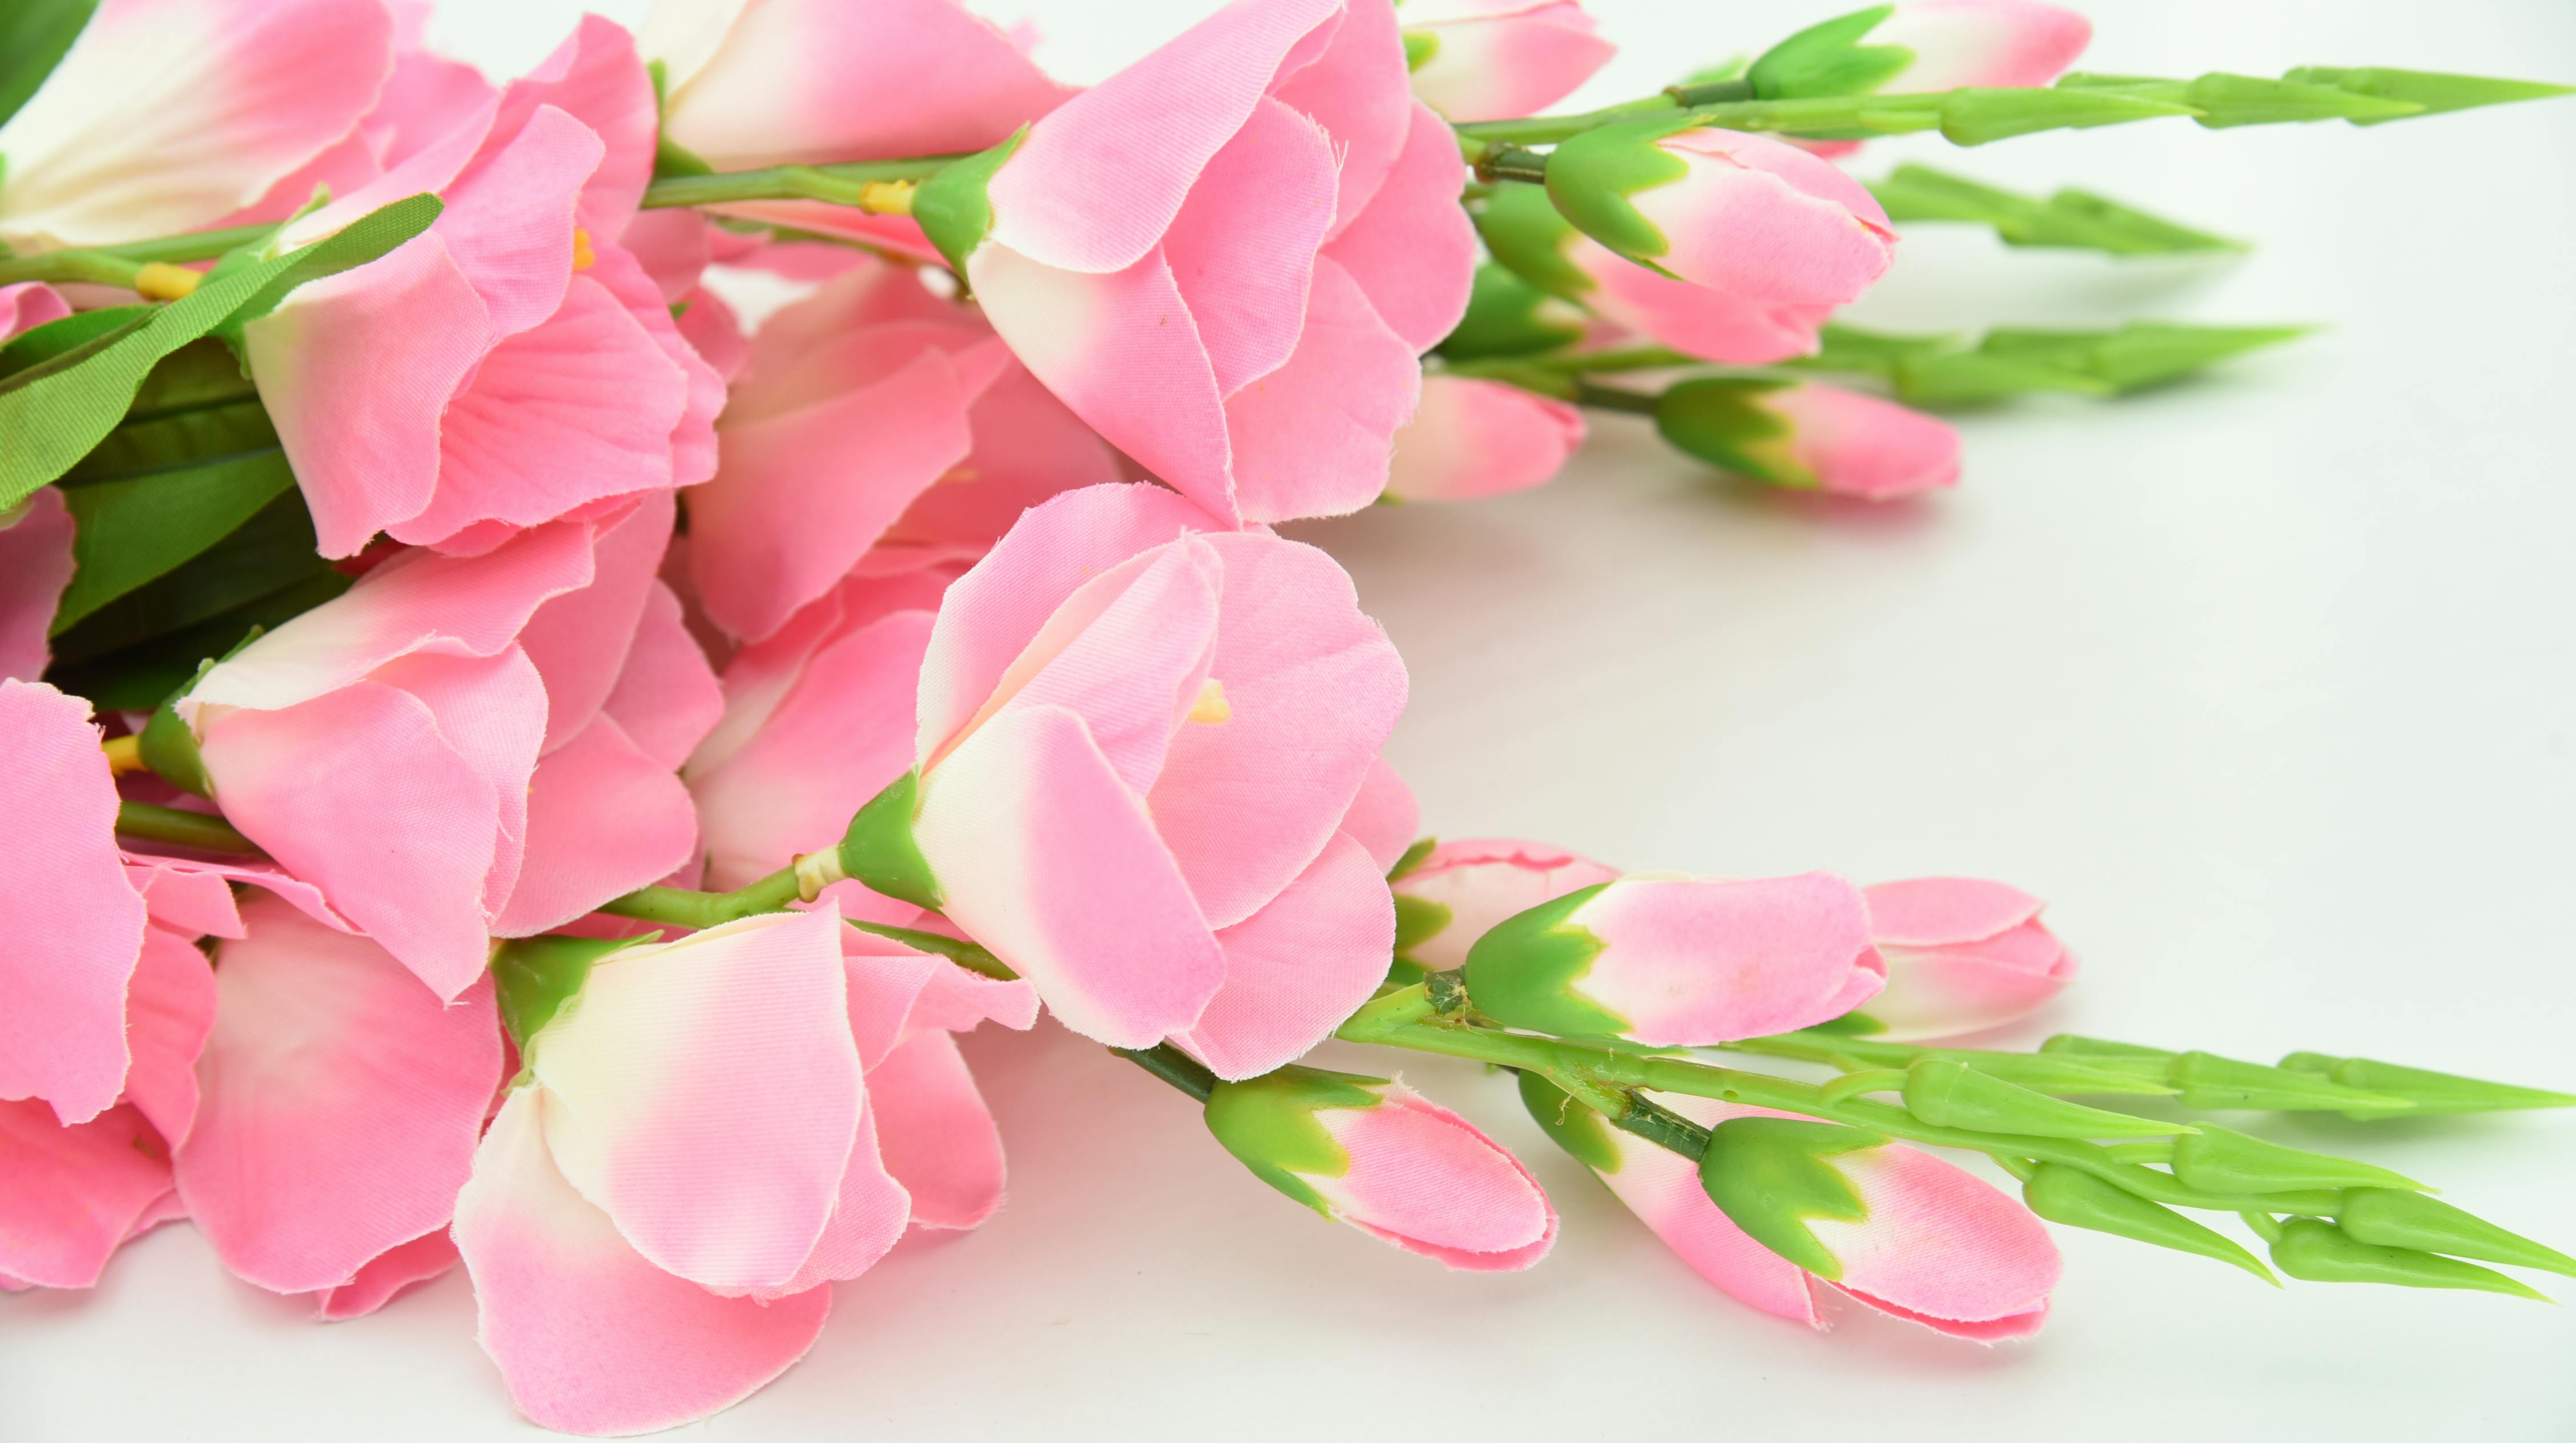 The Most Beautiful Pink Flowers  Pink flowers background, Pink